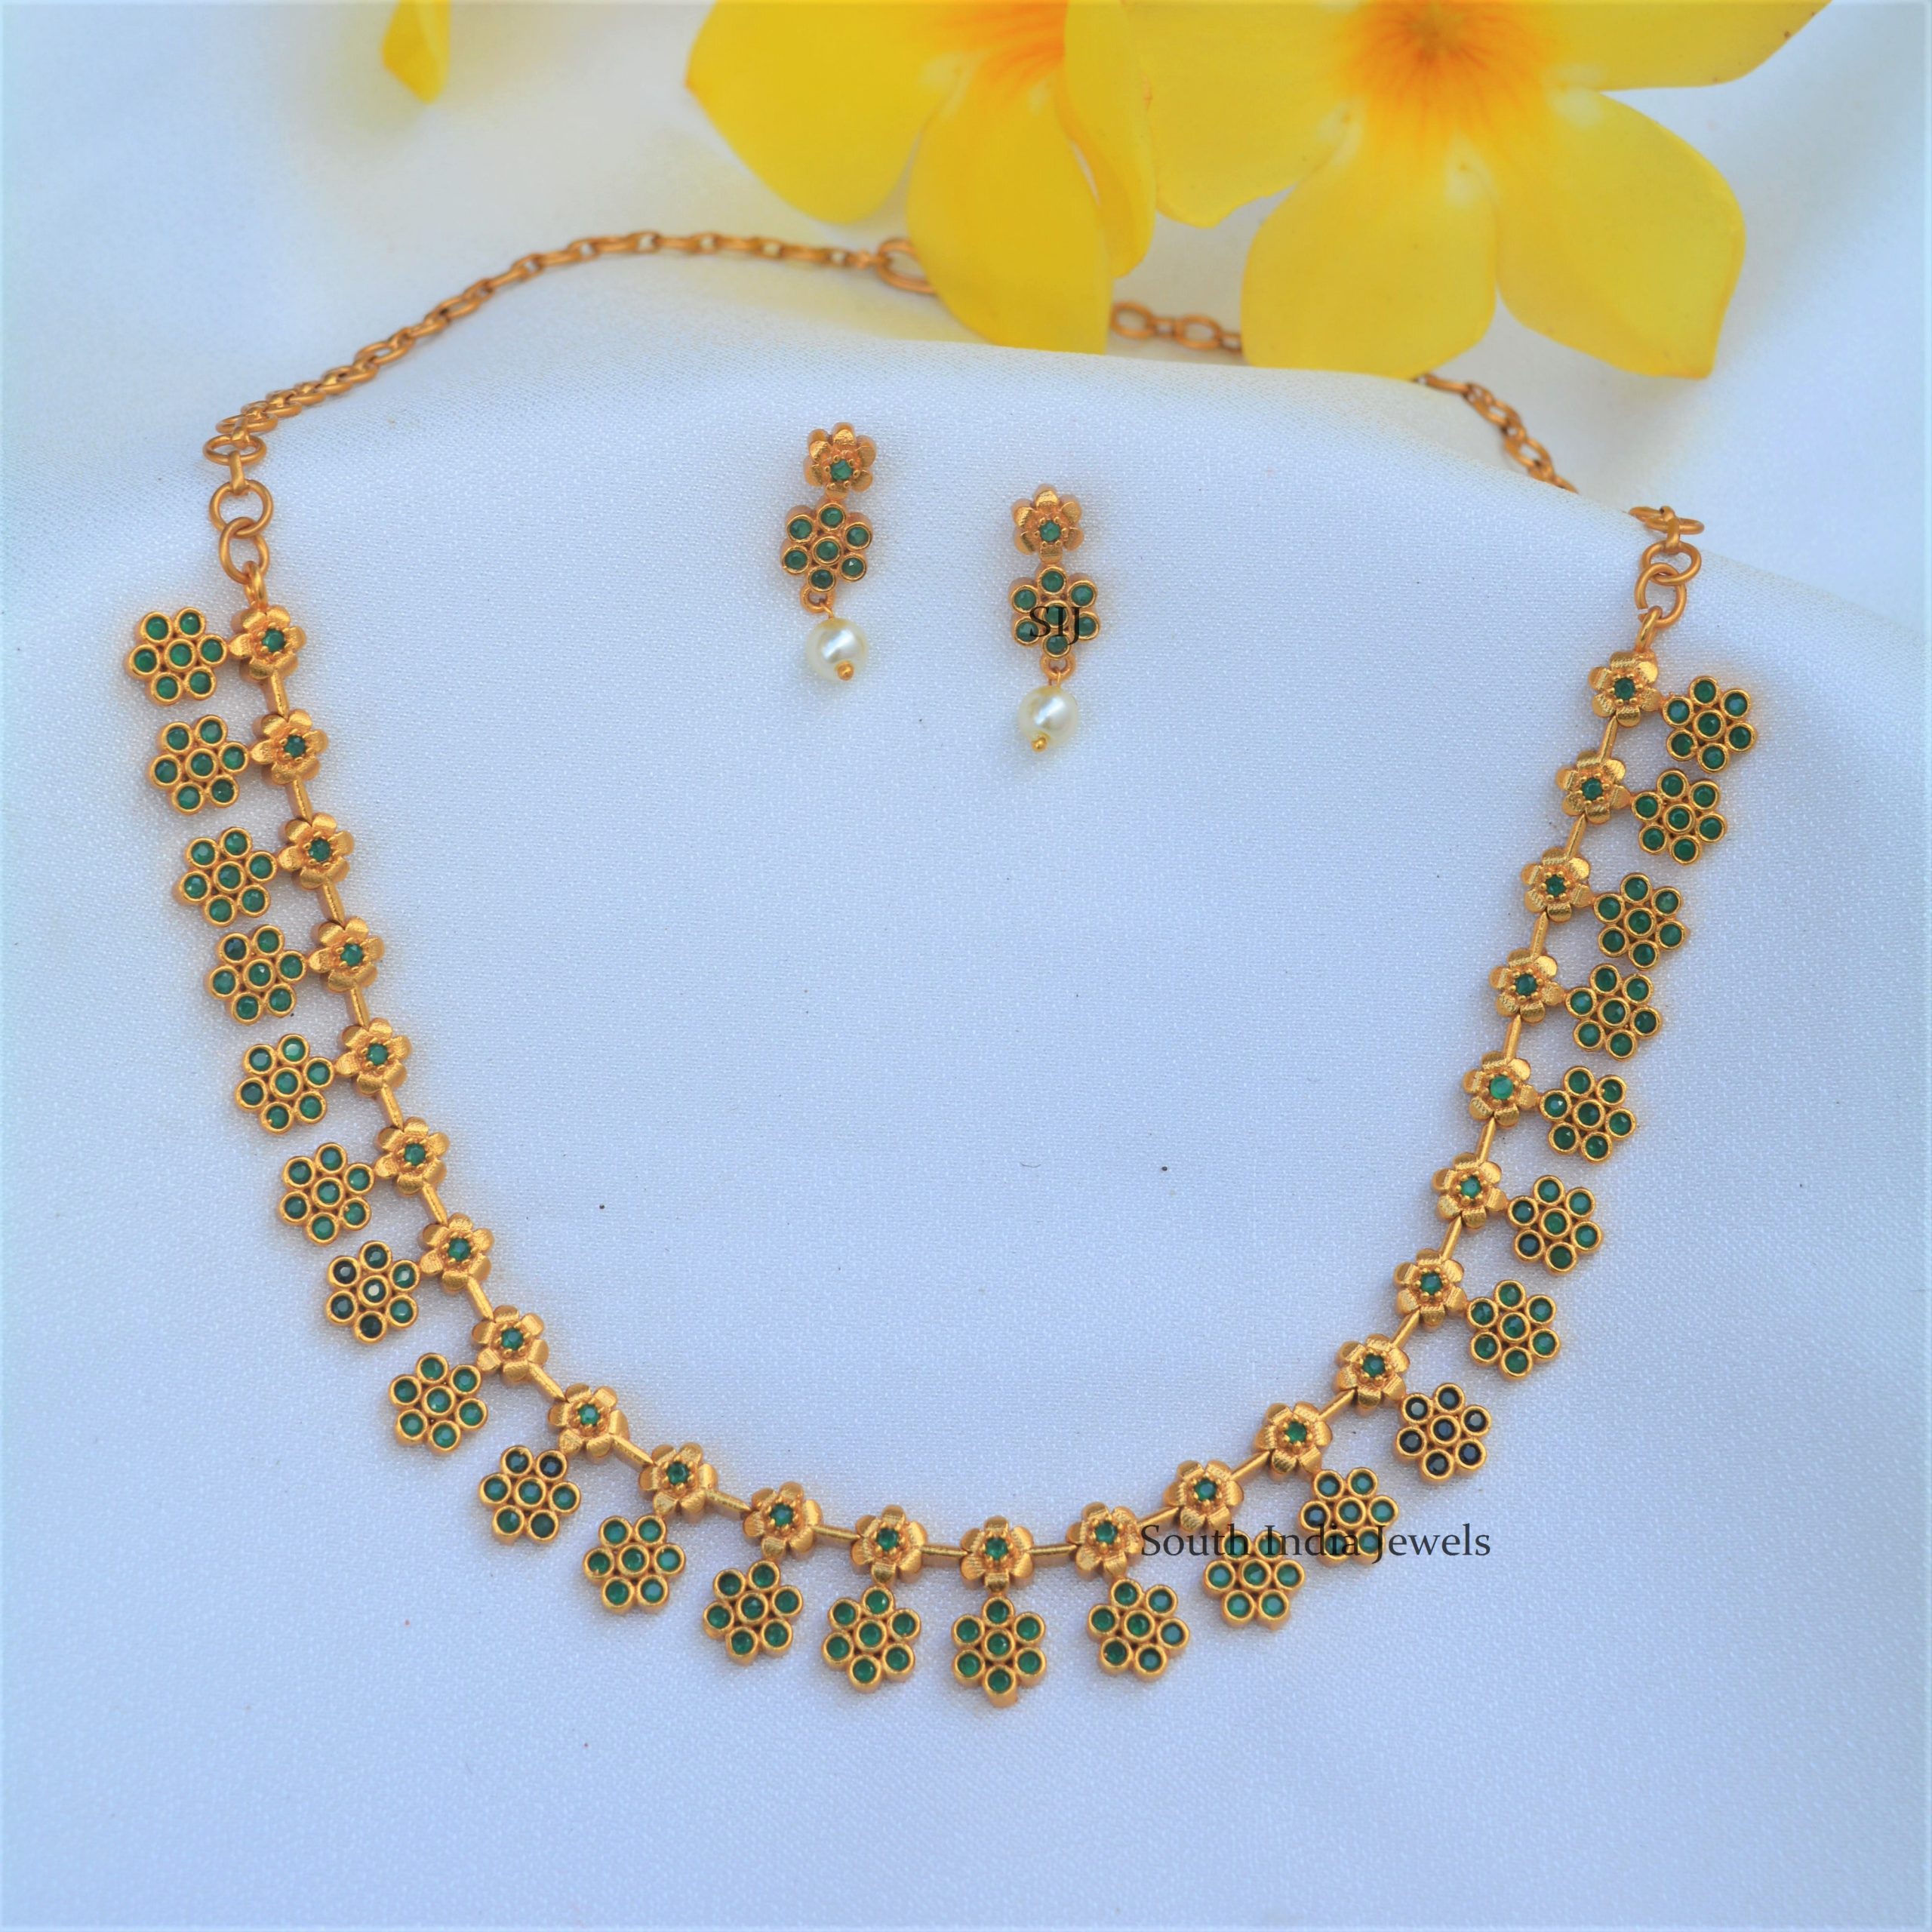 Green Matte Finish Necklace for Saree - South India Jewels